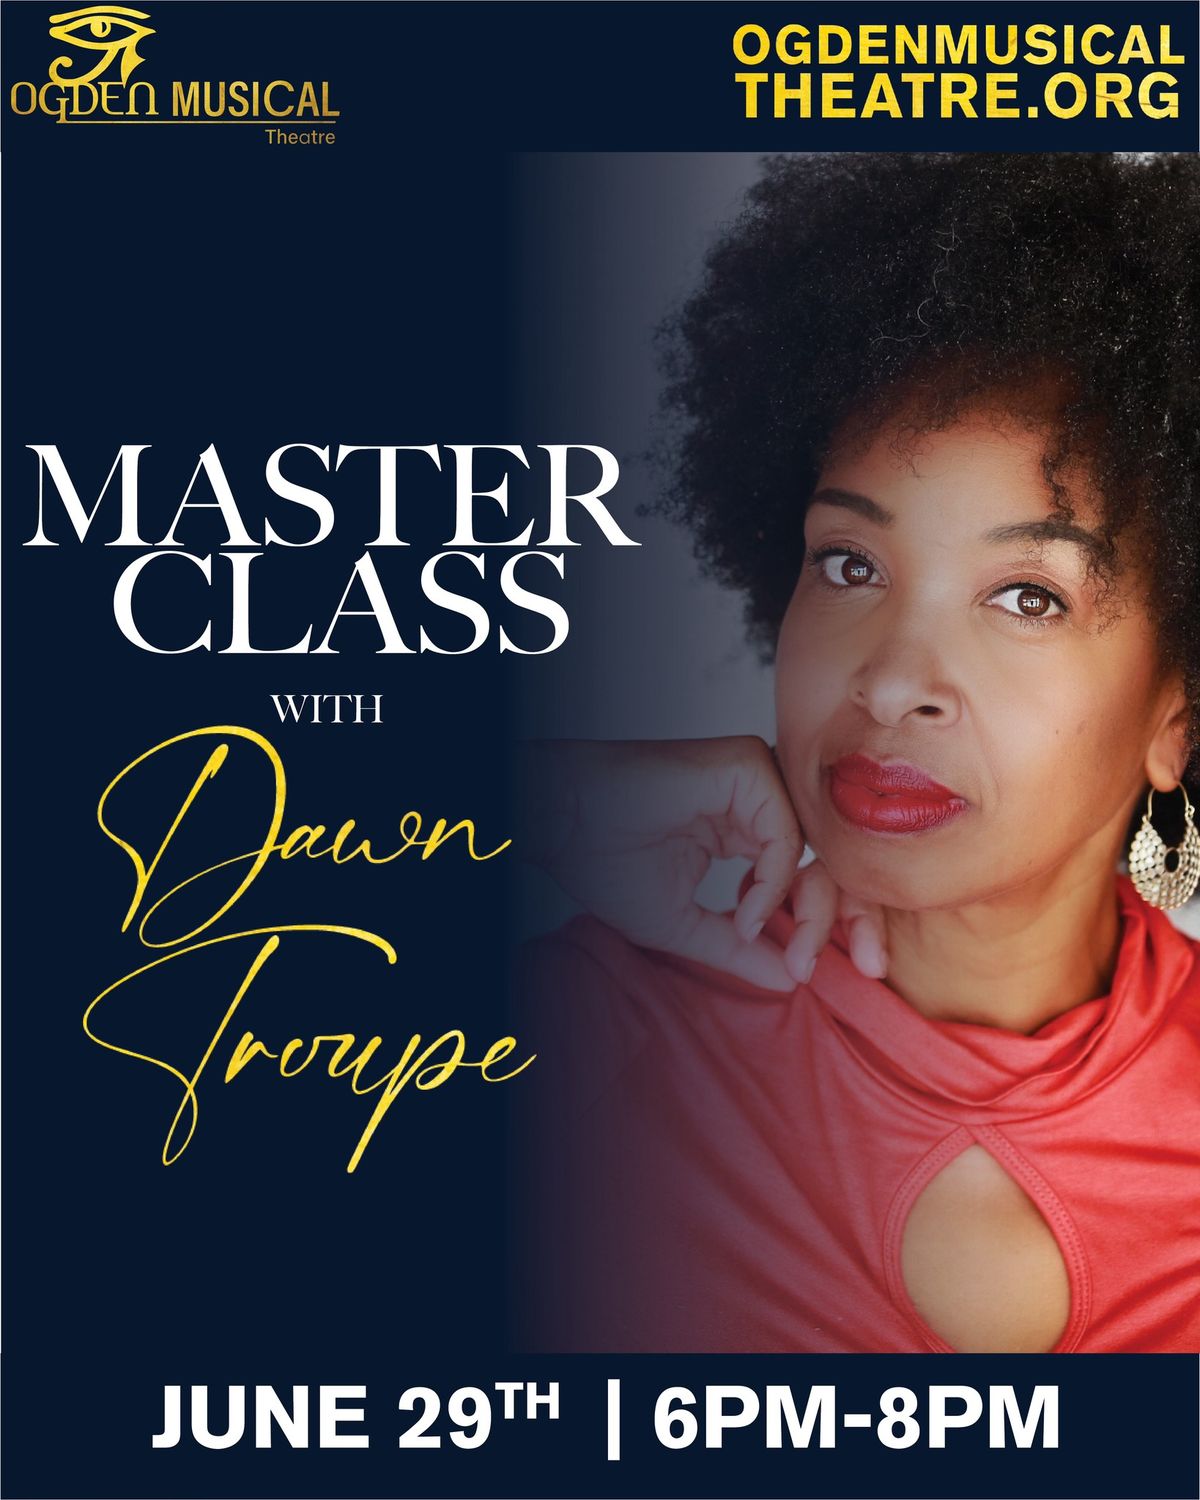 Master Class with Dawn L. Troupe